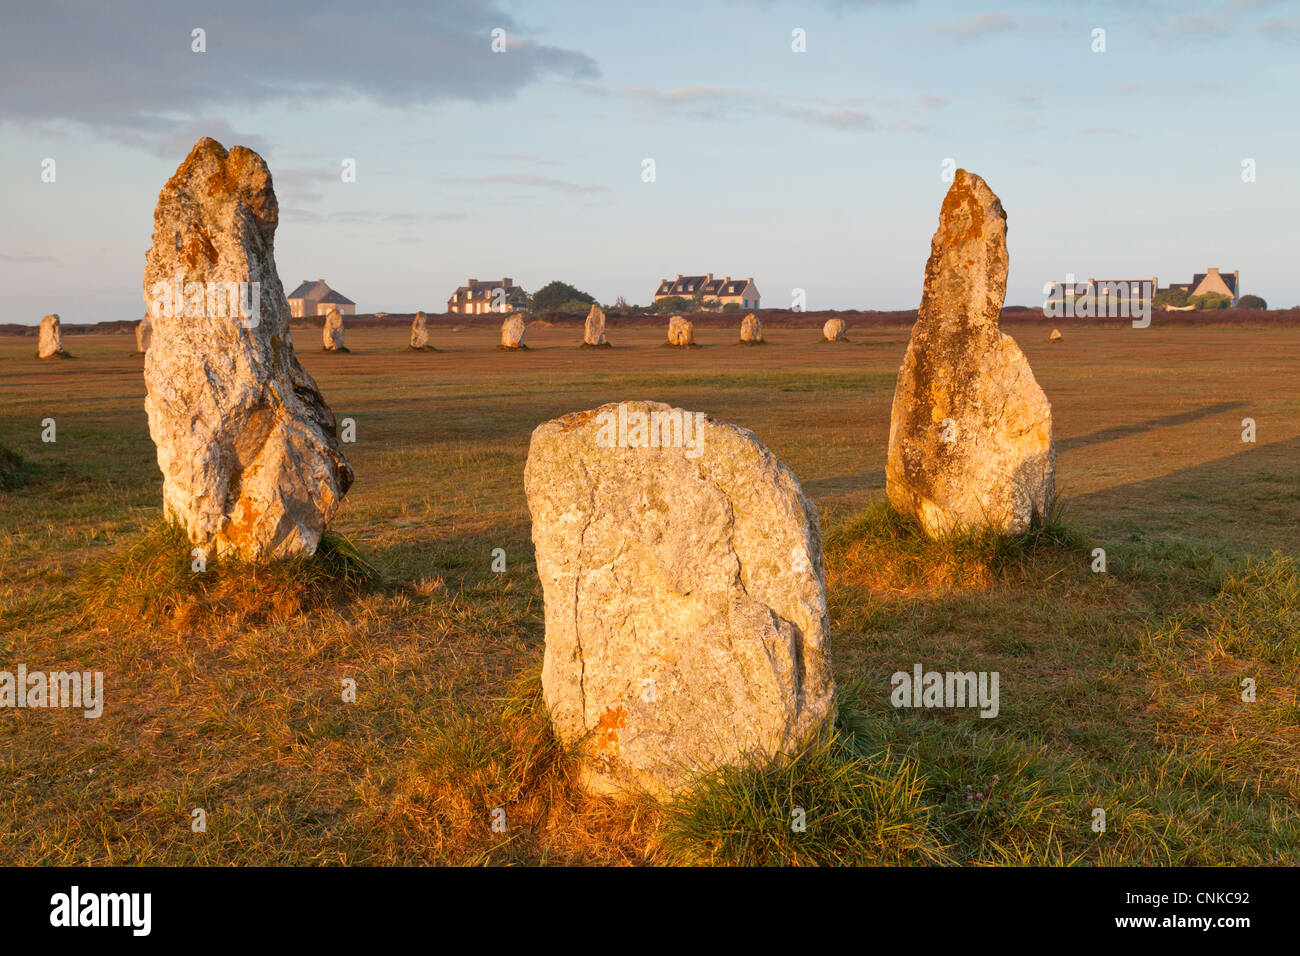 Stones in the alignments at Lagatjar, on the outskirts of Camaret-sur-Mer, Brittany, France. Stock Photo